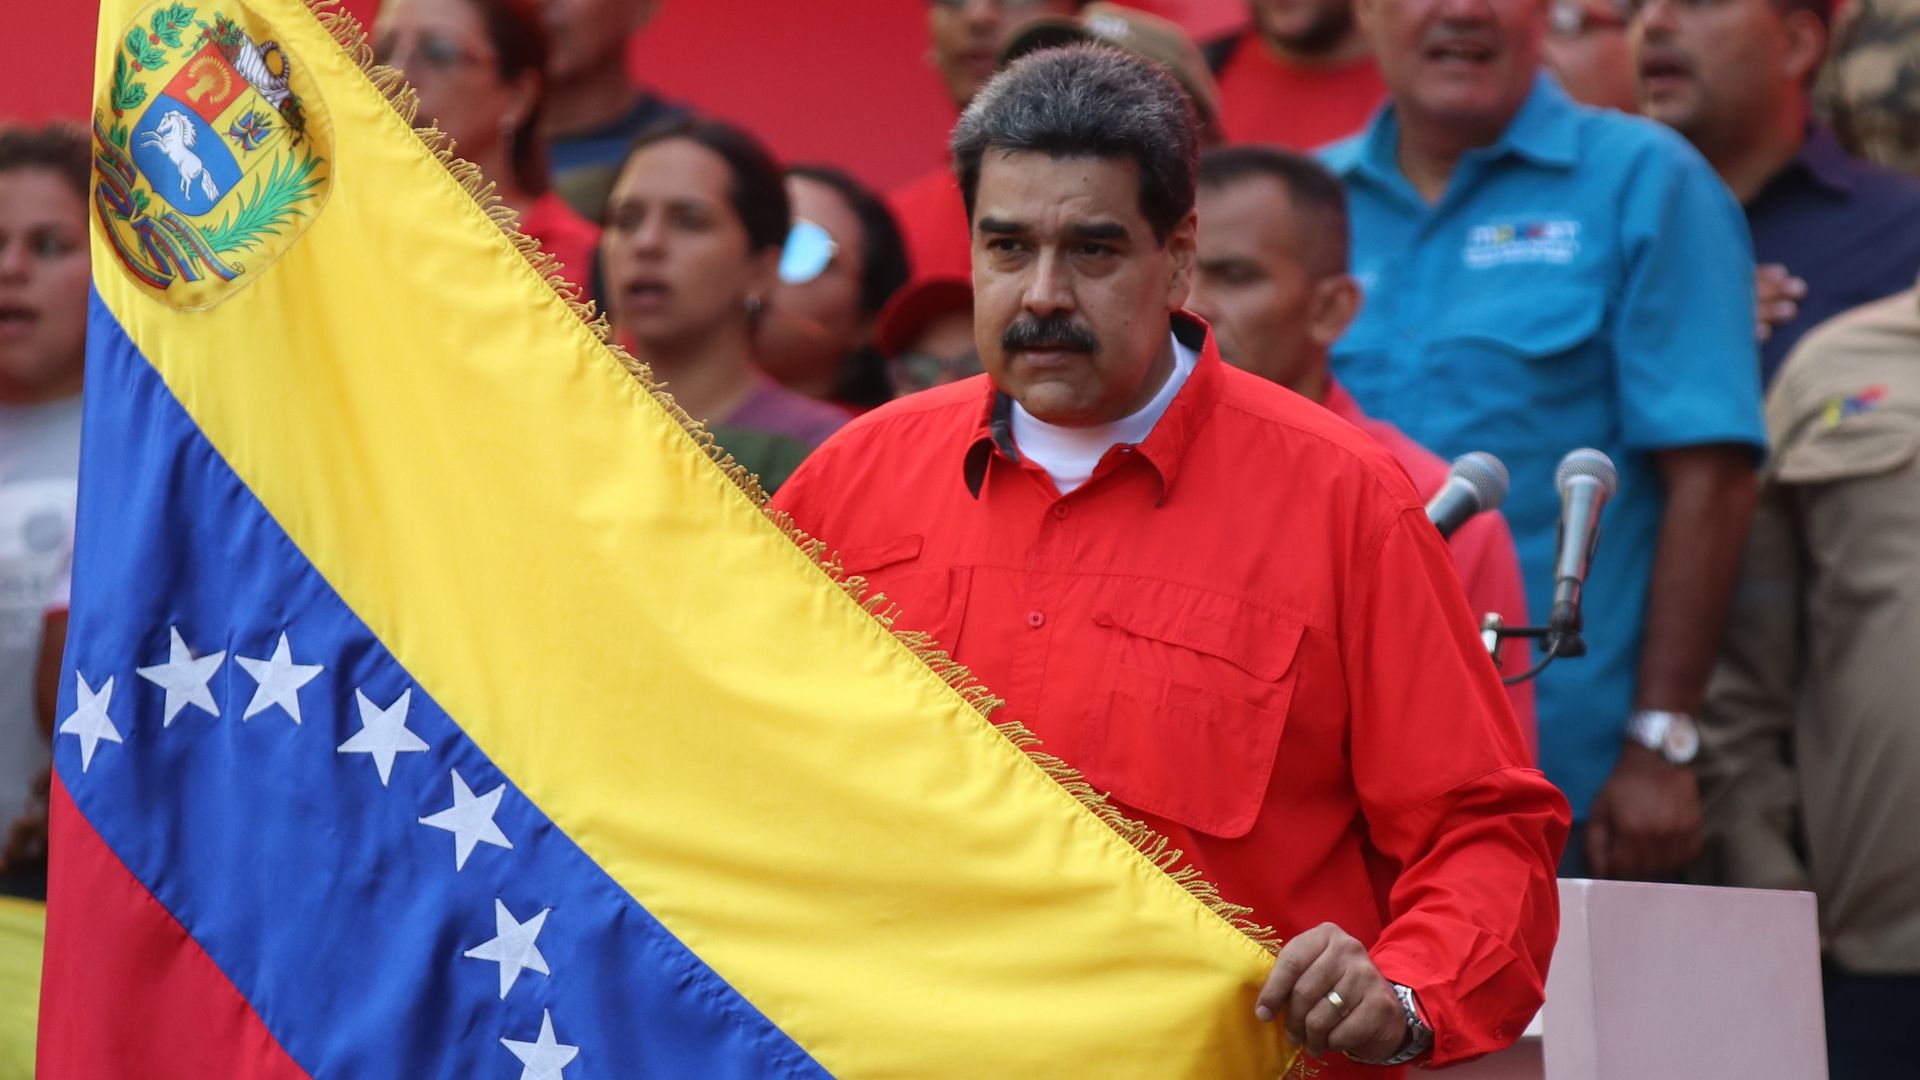 Nicolas Maduro holding up the Venzuelan flag at a rally